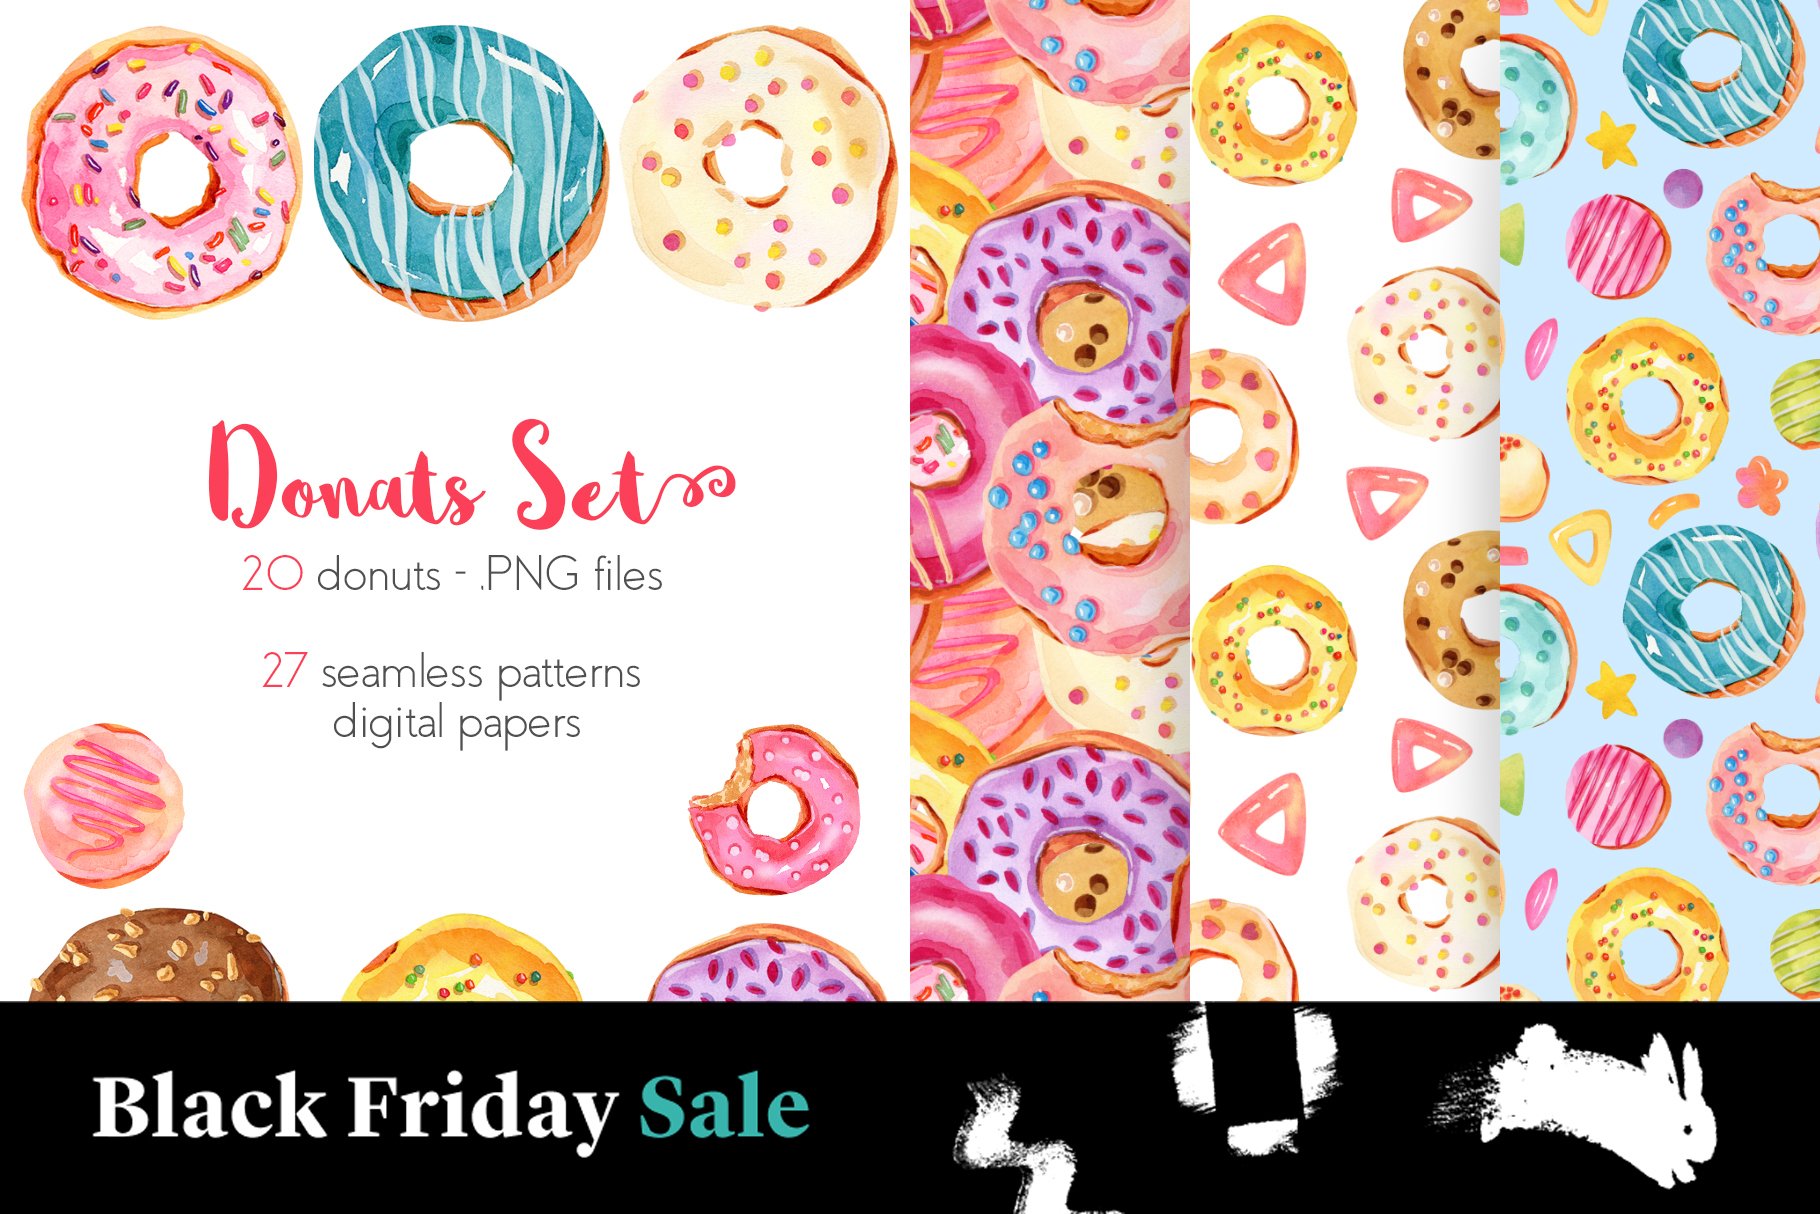 Watercolor Donuts Set cover image.